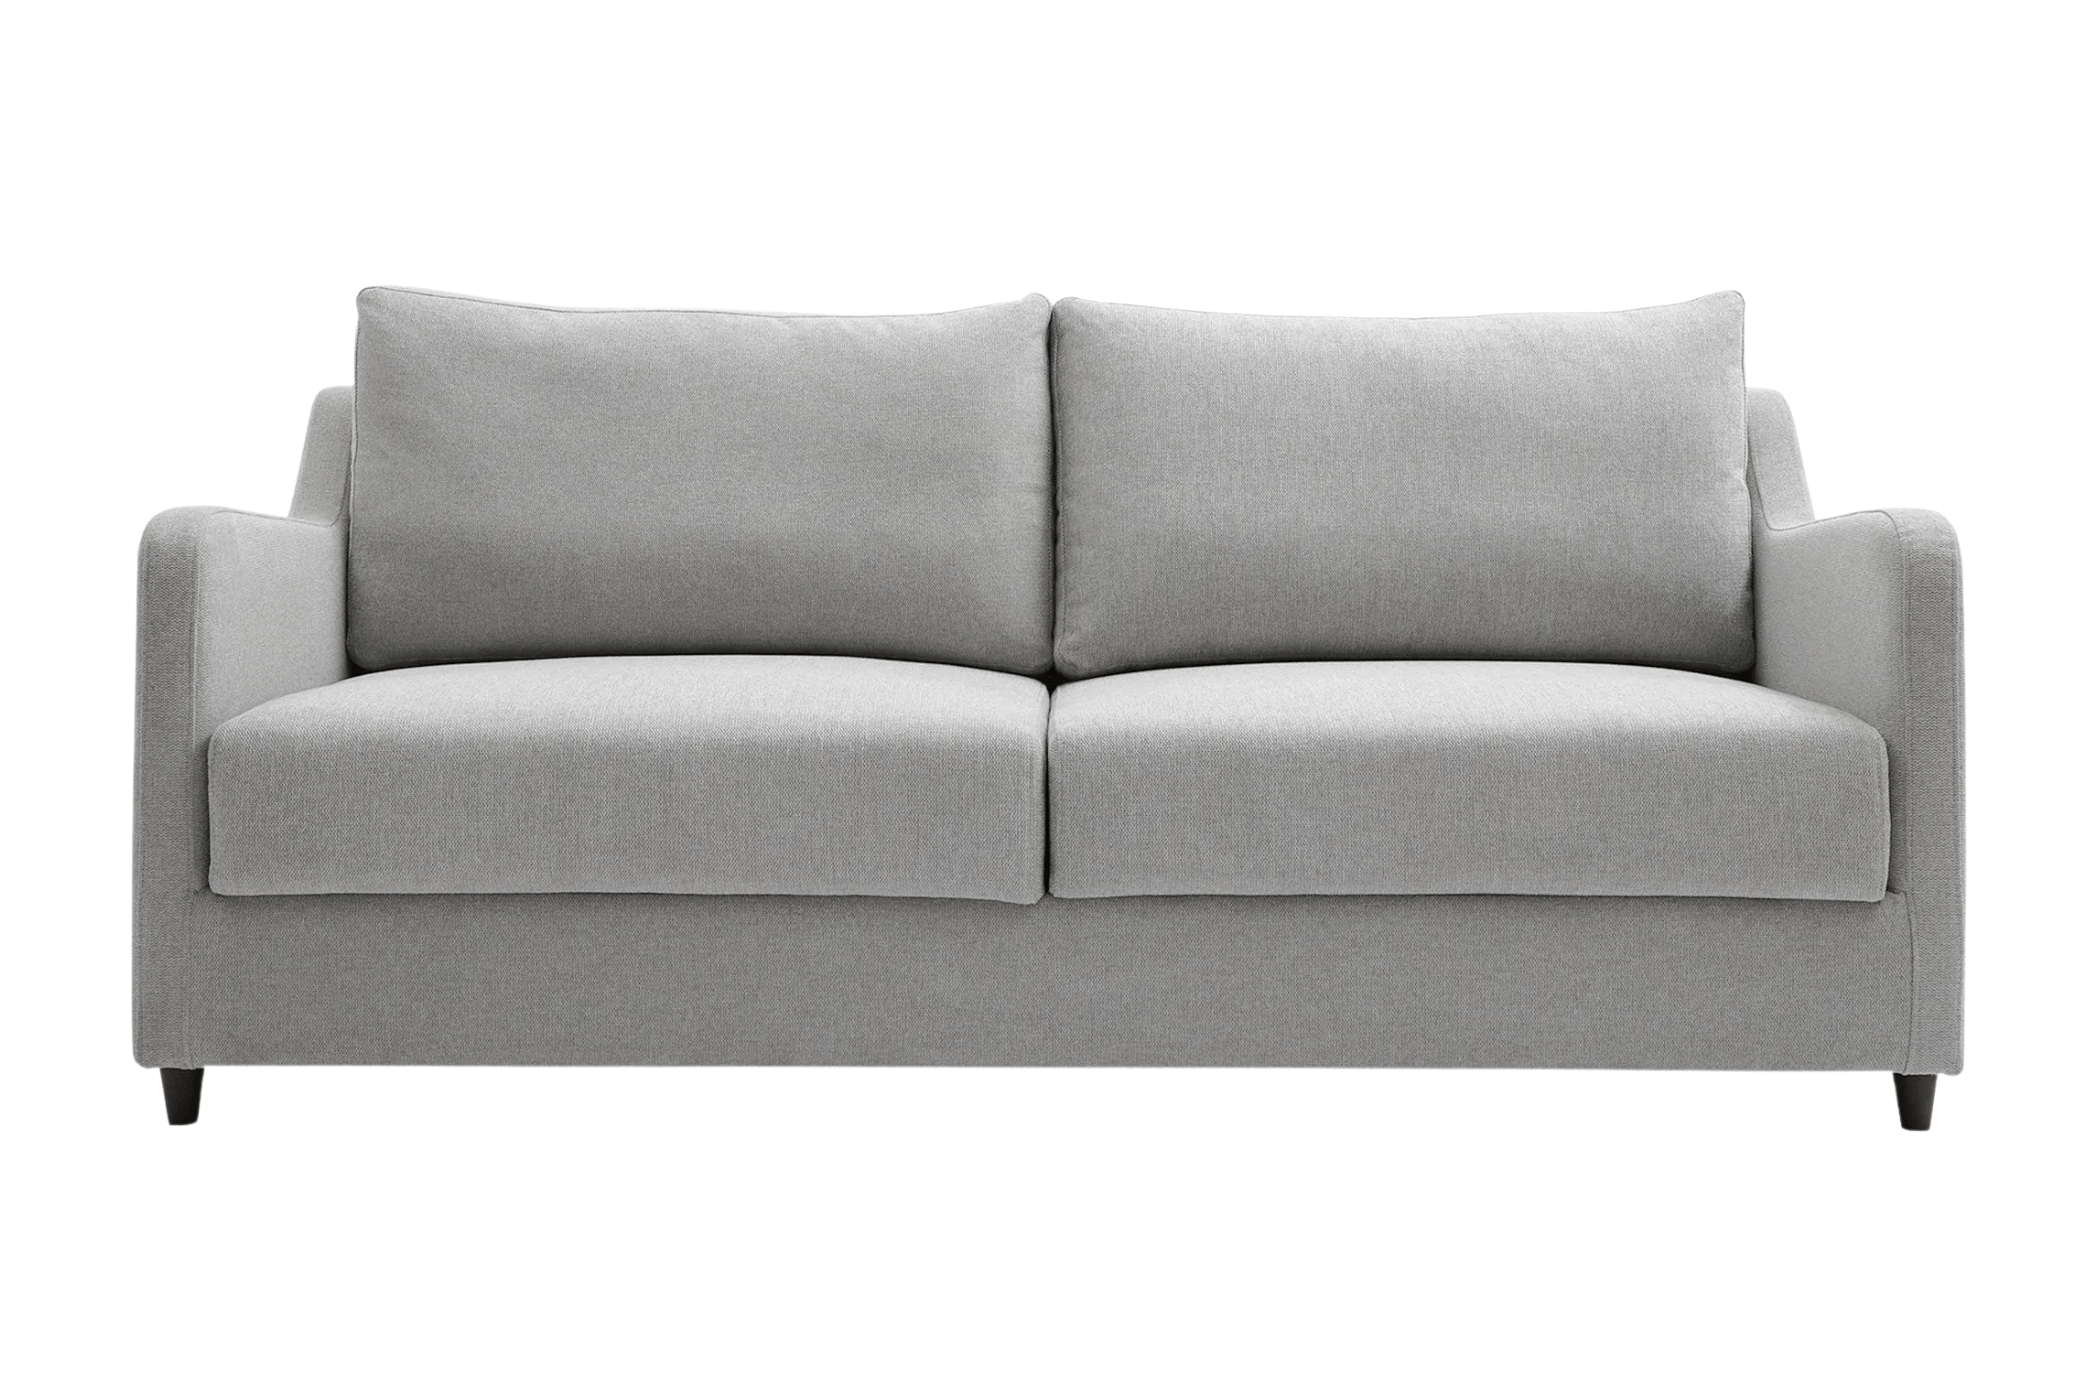 Noble 2 Seat Sofa Bed